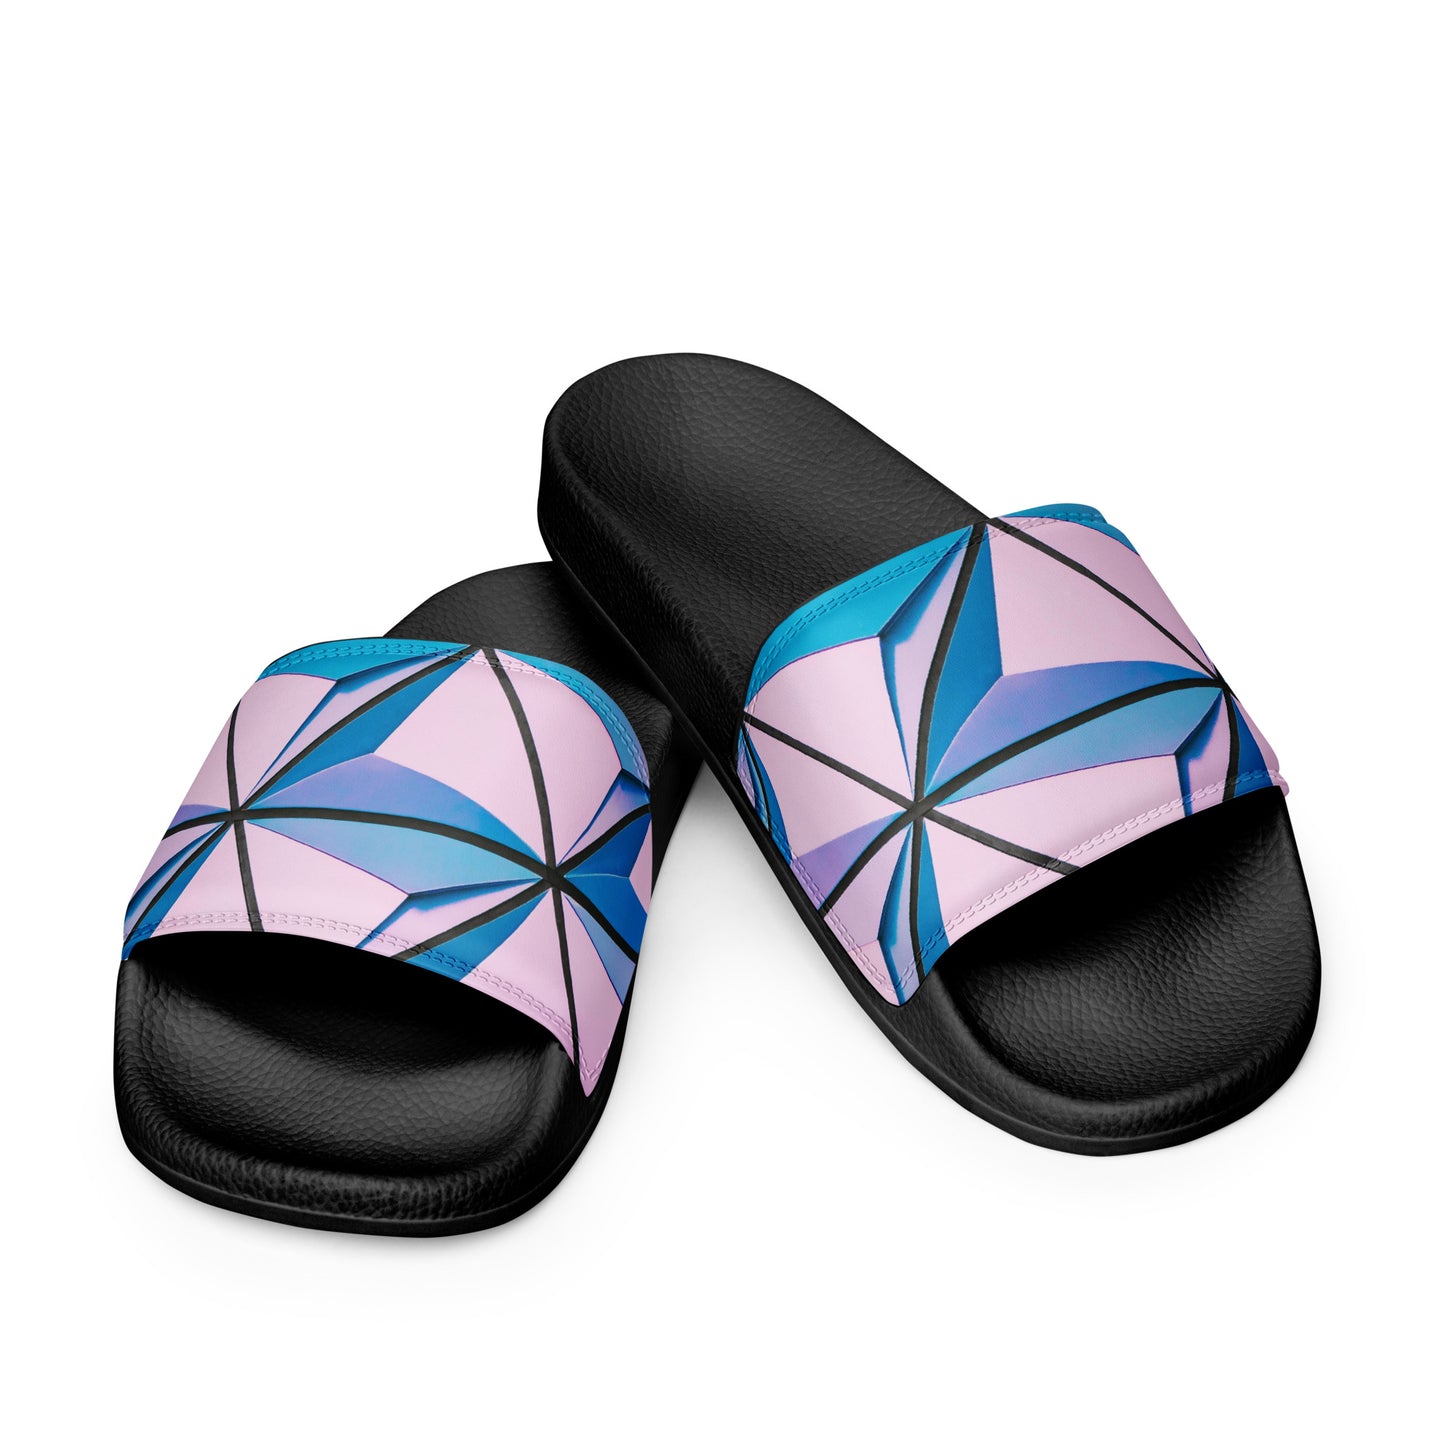 Linage Of Angles Women's slides